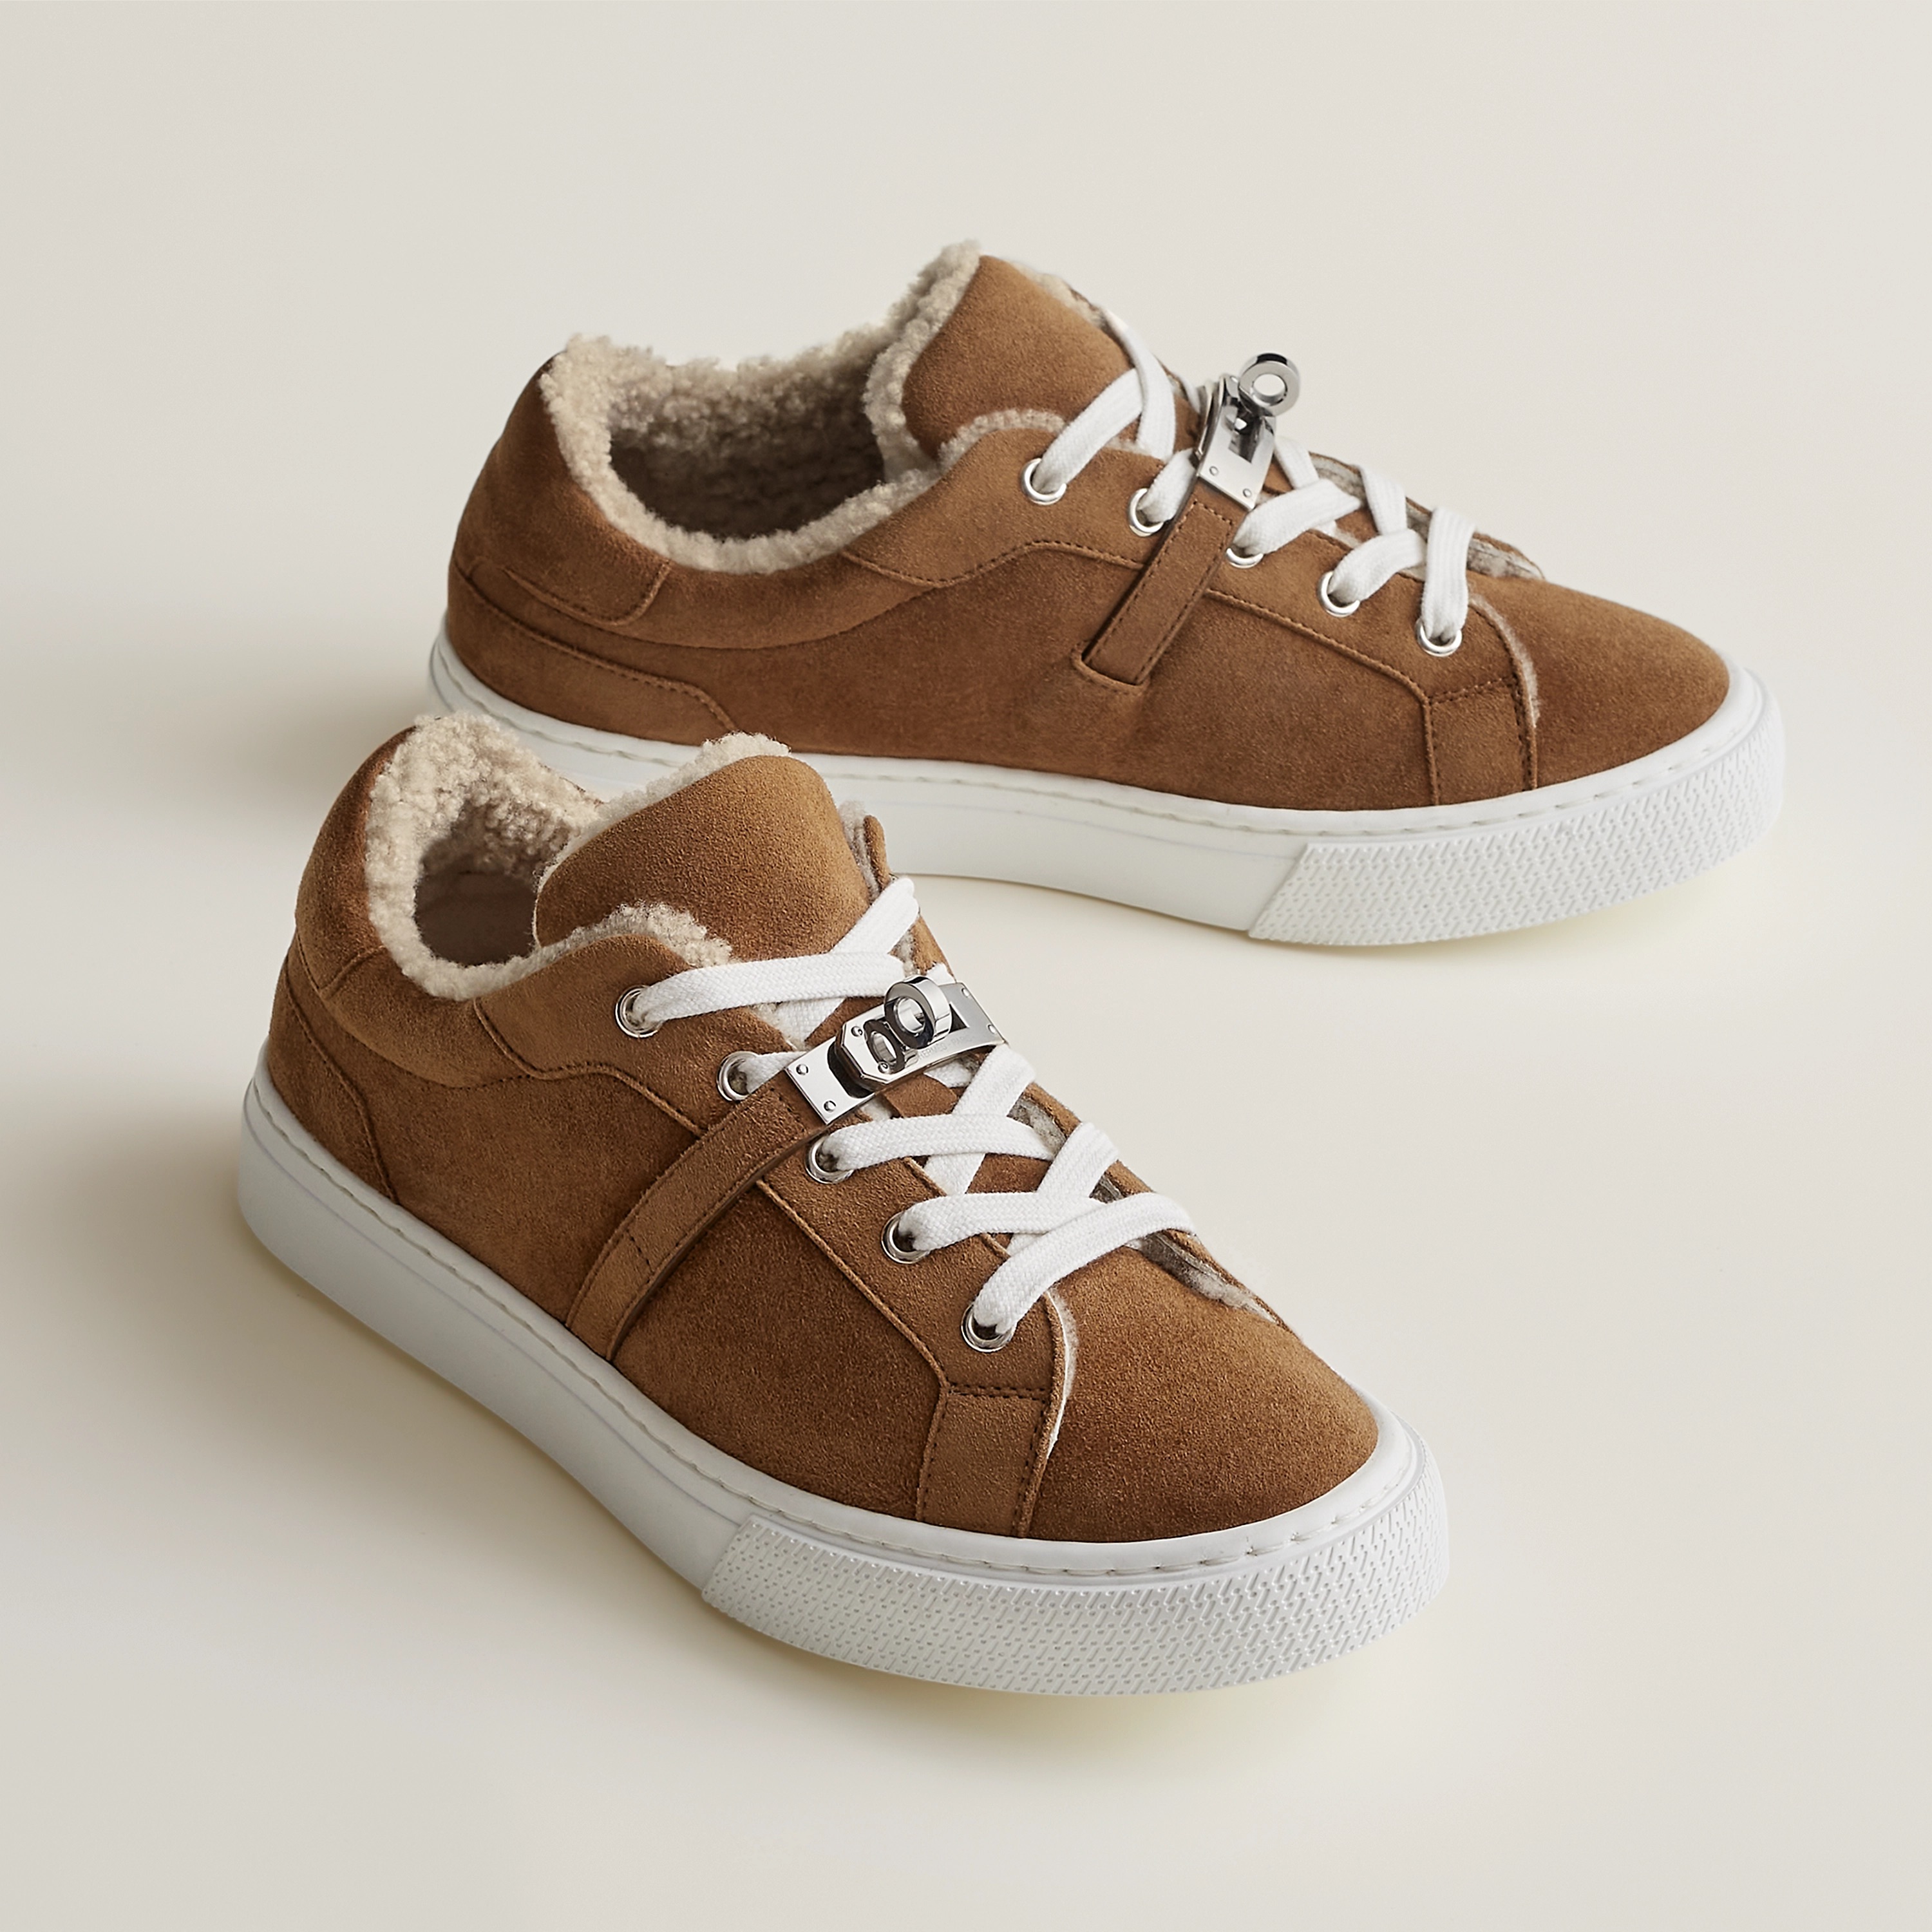 Brun Fumé / Écru Day Sneaker in suede goatskin with shearling lining and functional palladium-plated Kelly buckle, $1350. Photo via Hermès.com.